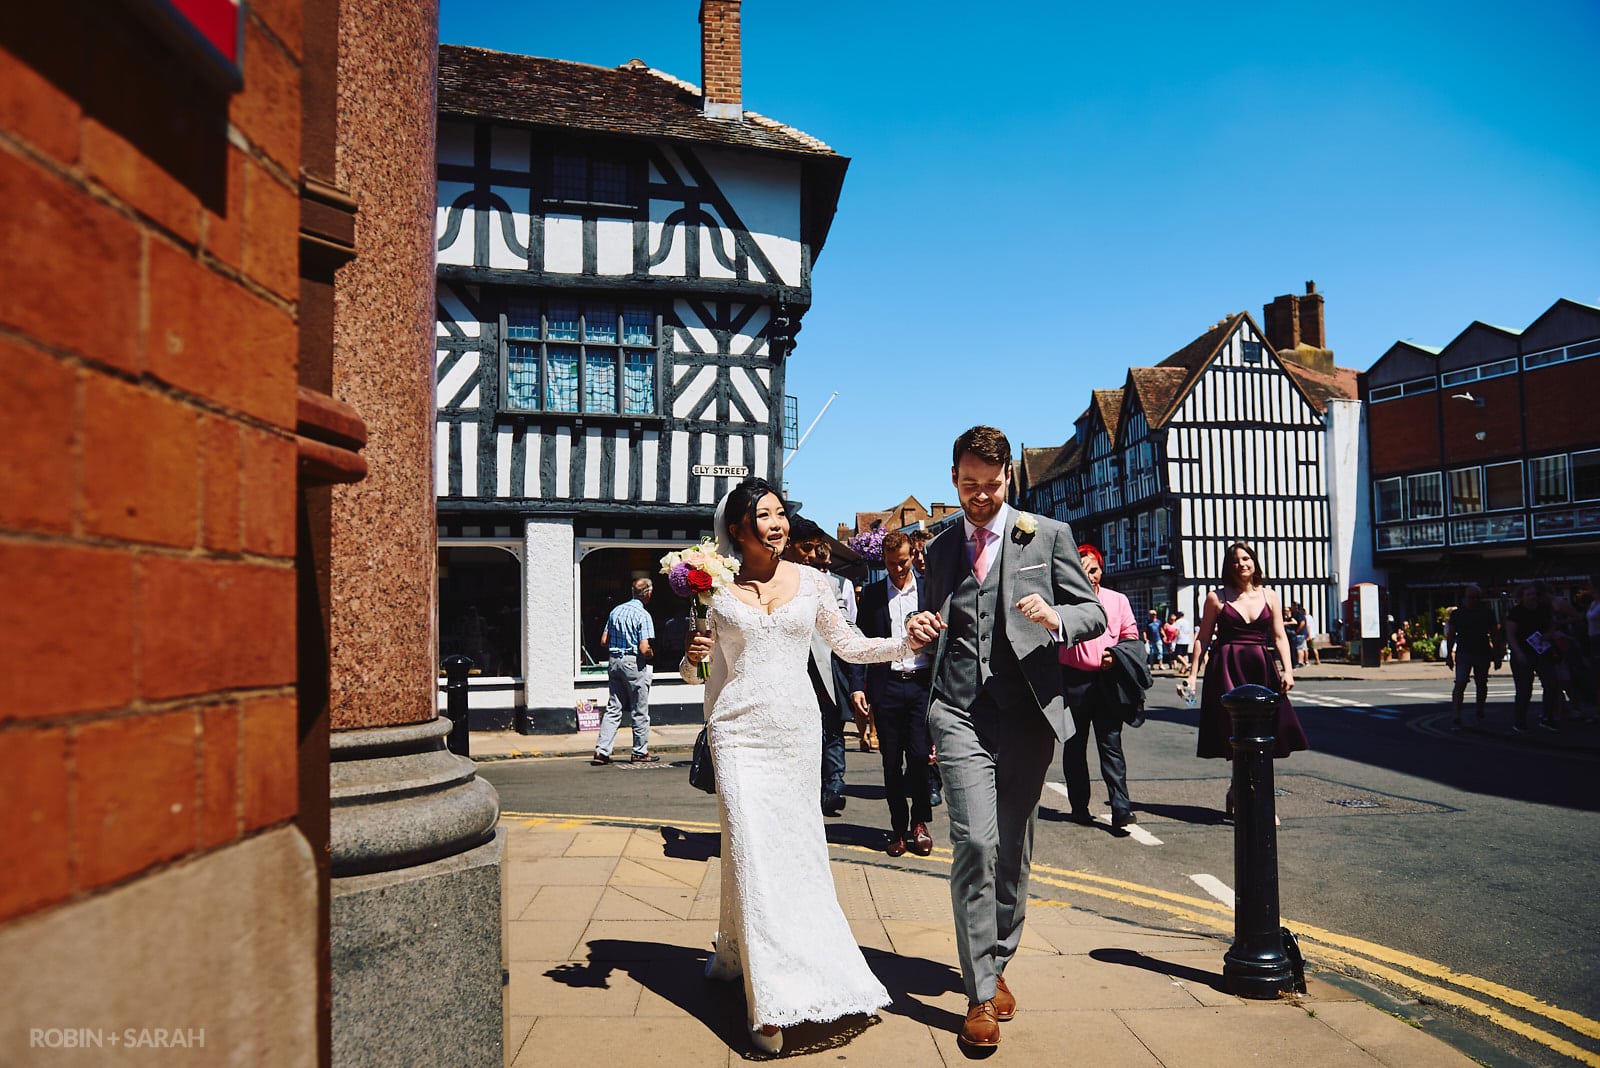 Bride, groom and wedding guests walk through Stratford upon Avon town centre